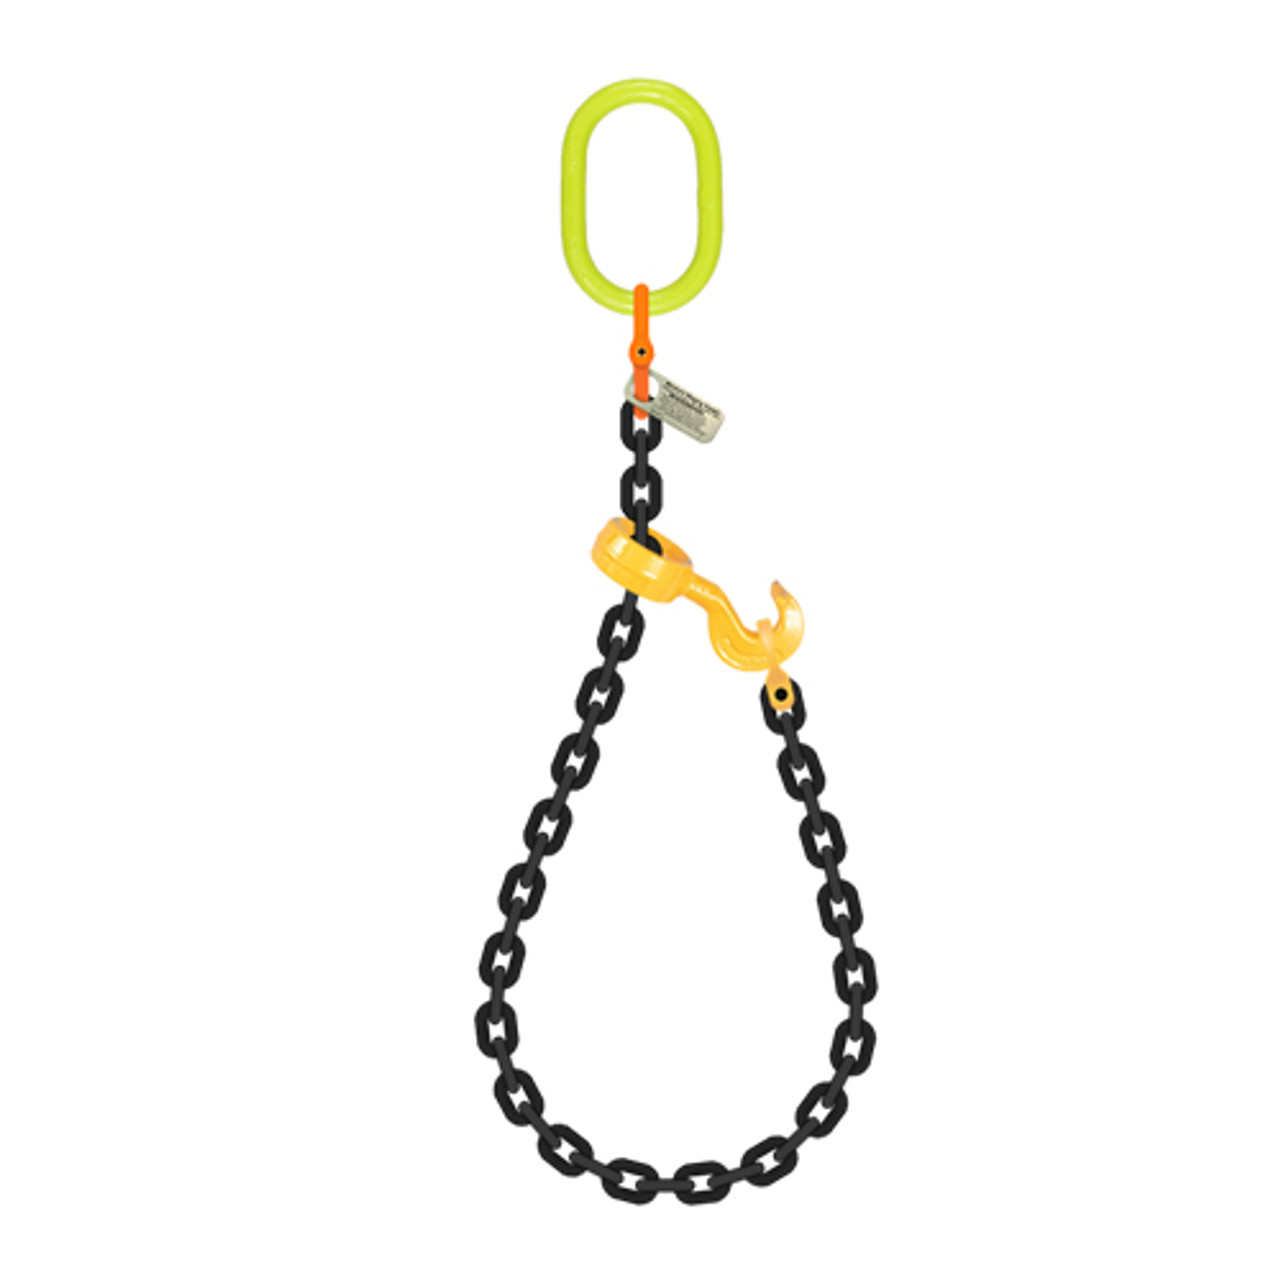 J Hook Chain, 5/16 in x 10 ft Bridle Tow Chain, Grade 80 Bridle